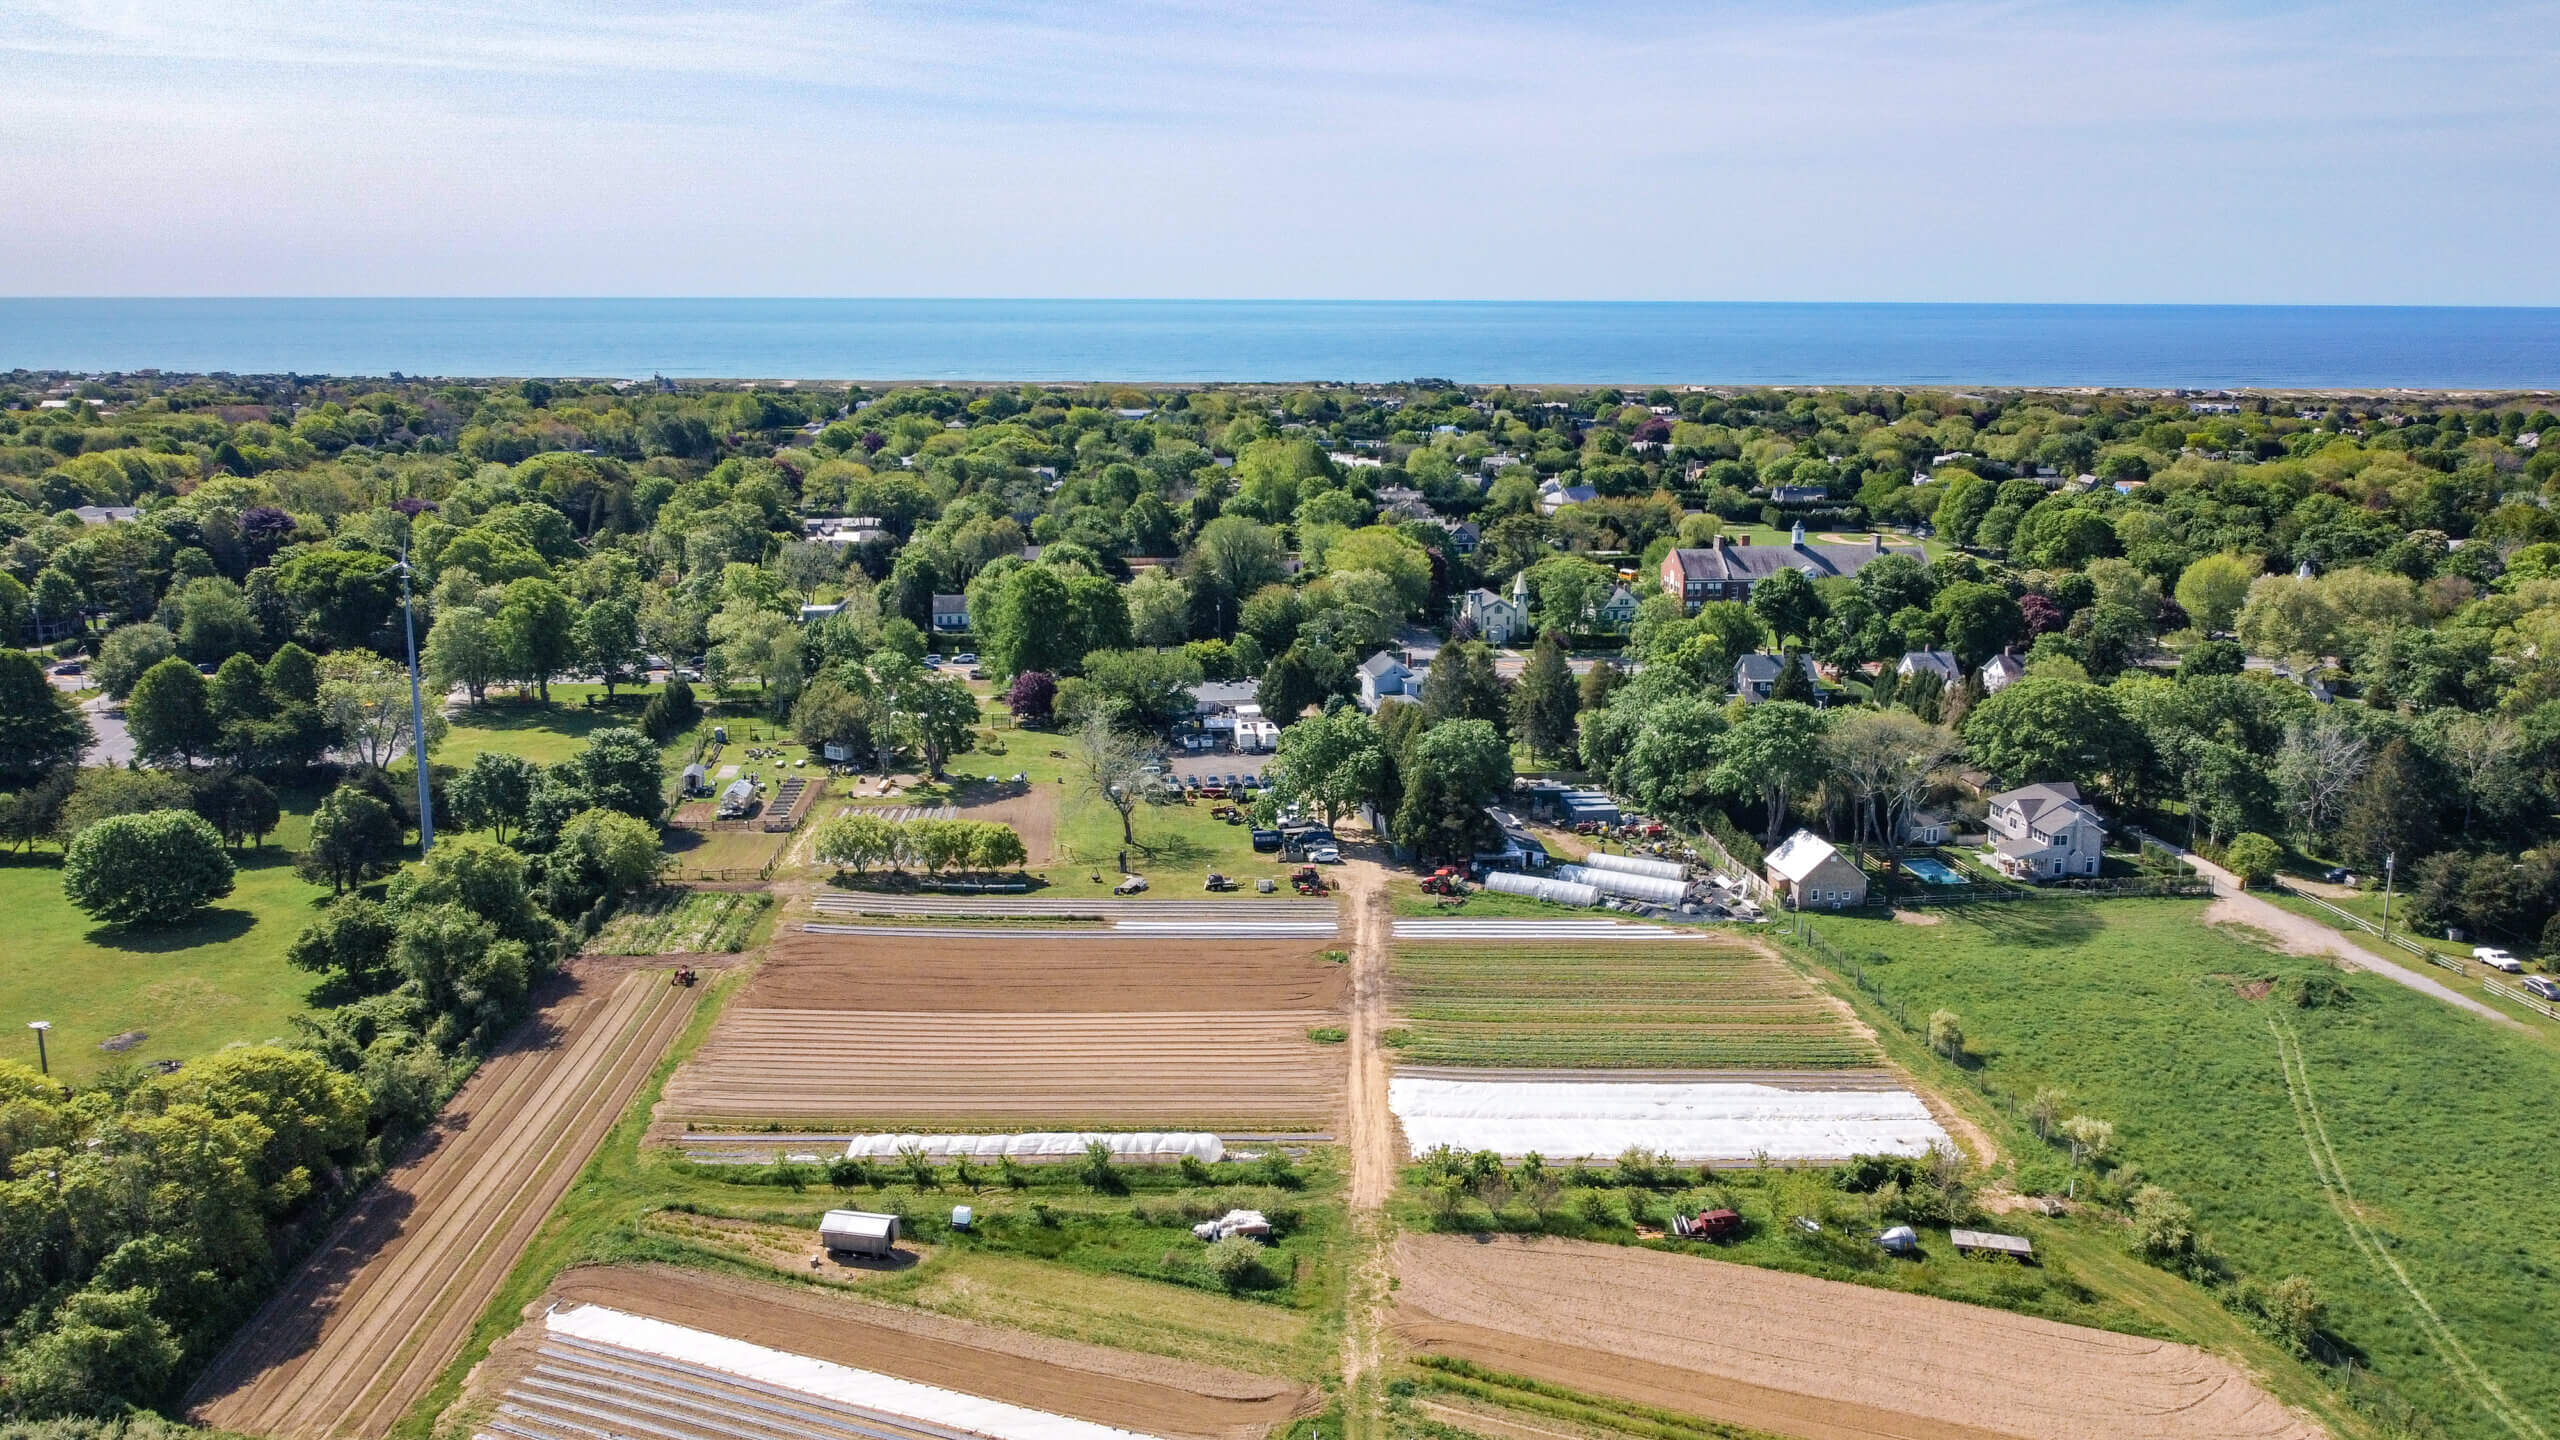 A bird's eye view of the Route 27 Amber Waves Farm 